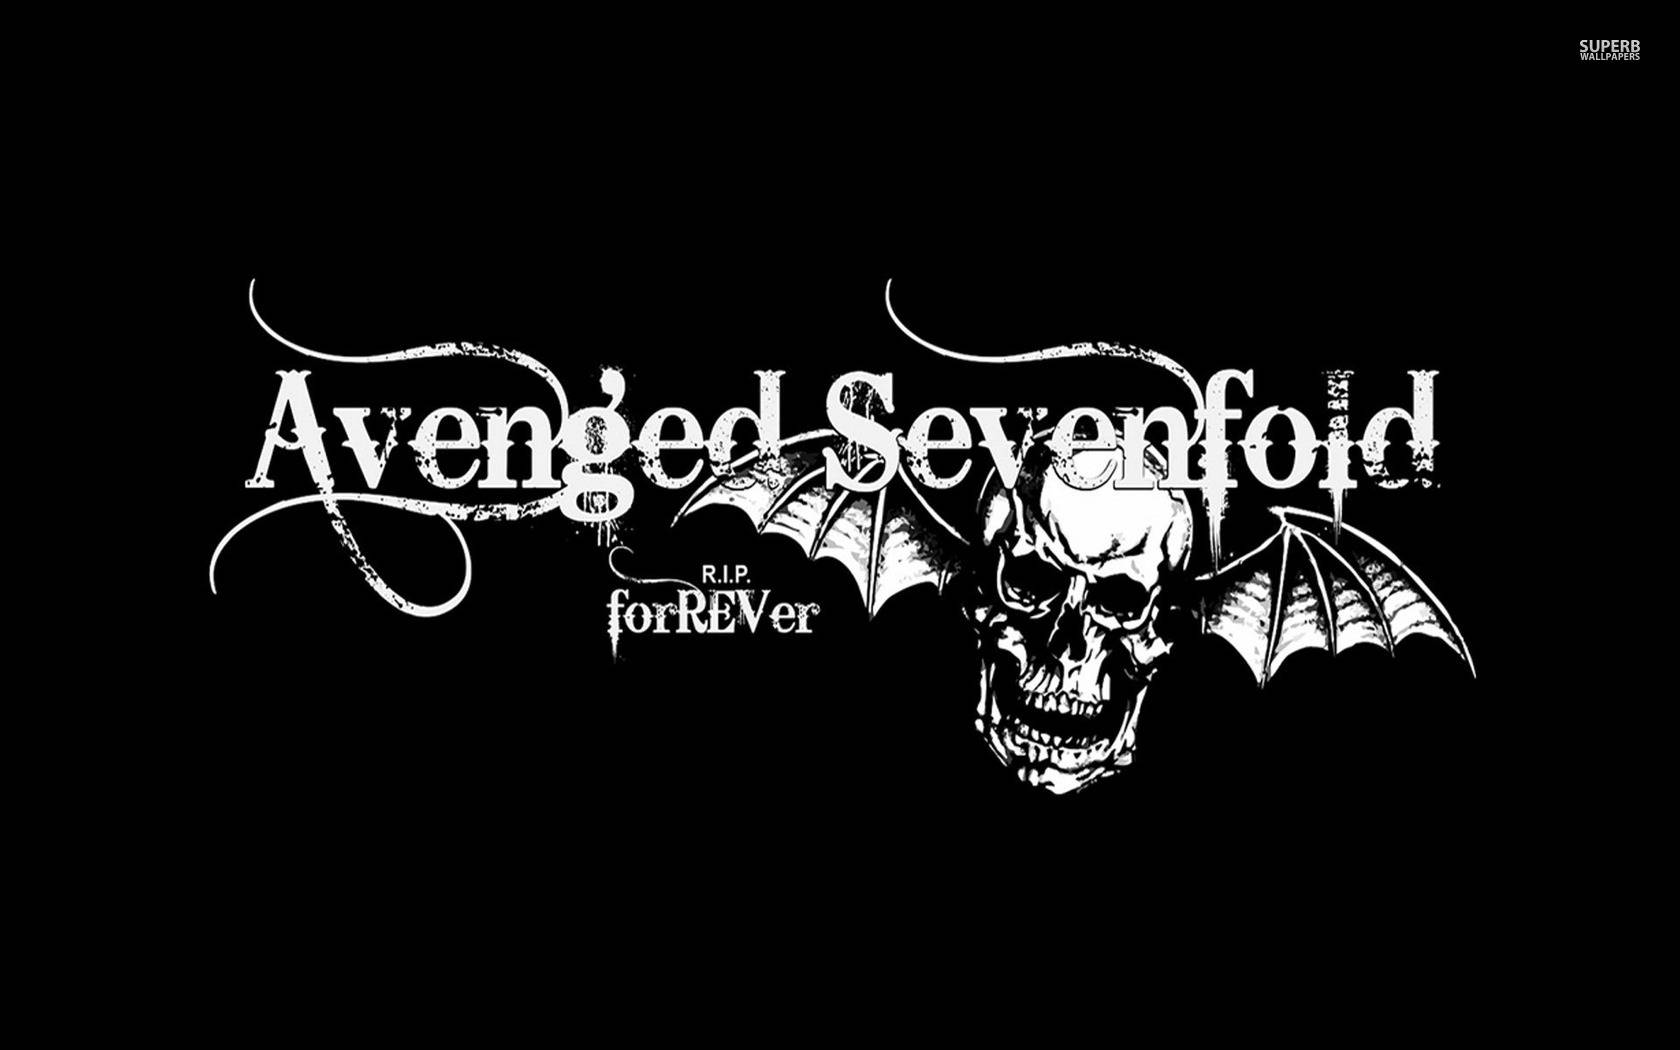 Avenged Sevenfold Wallpaper Android Application